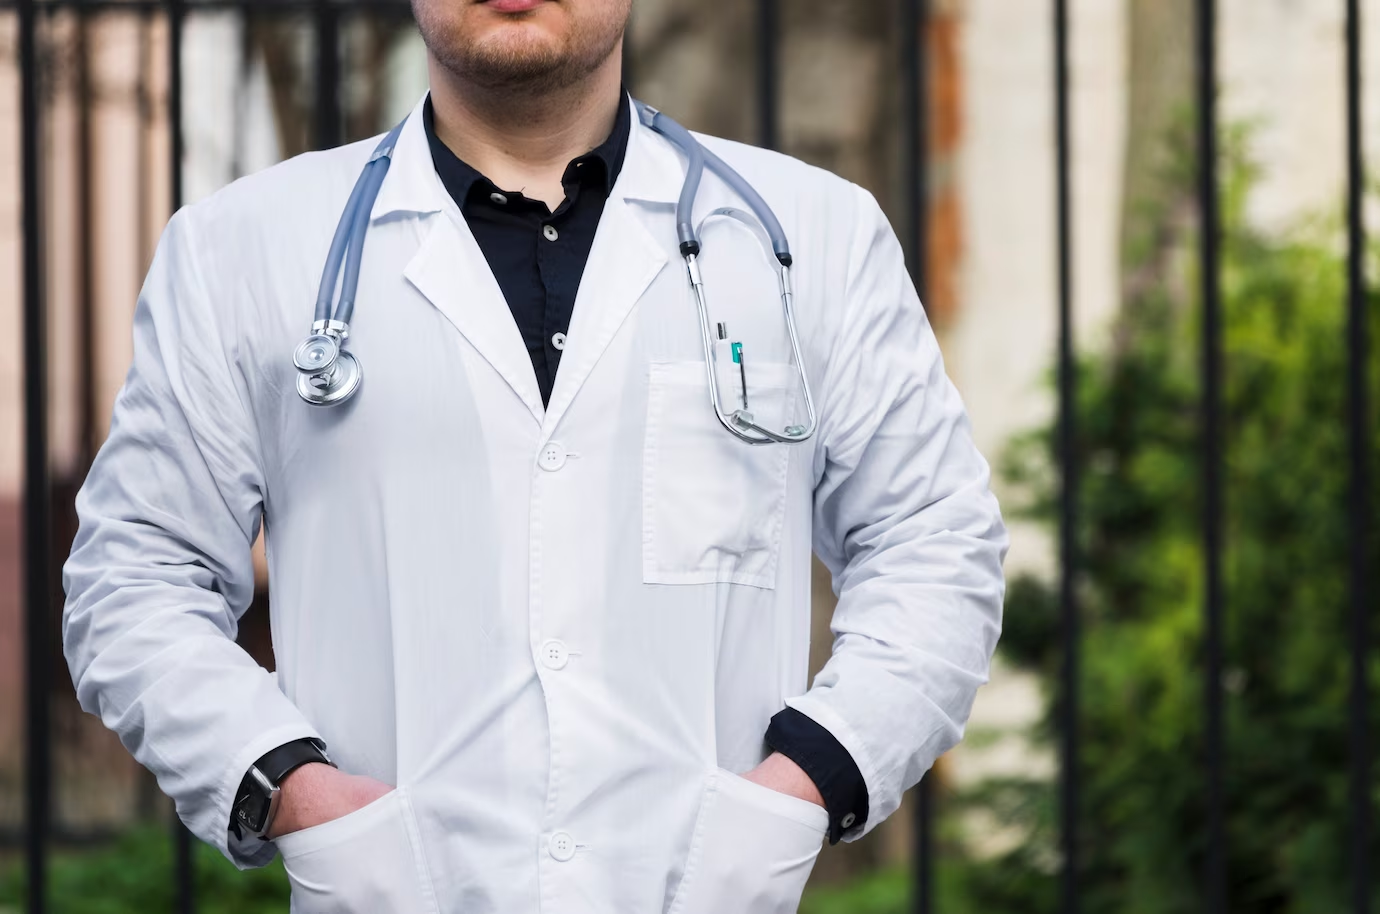 Doctor with stethoscope represents pre-med research experience.